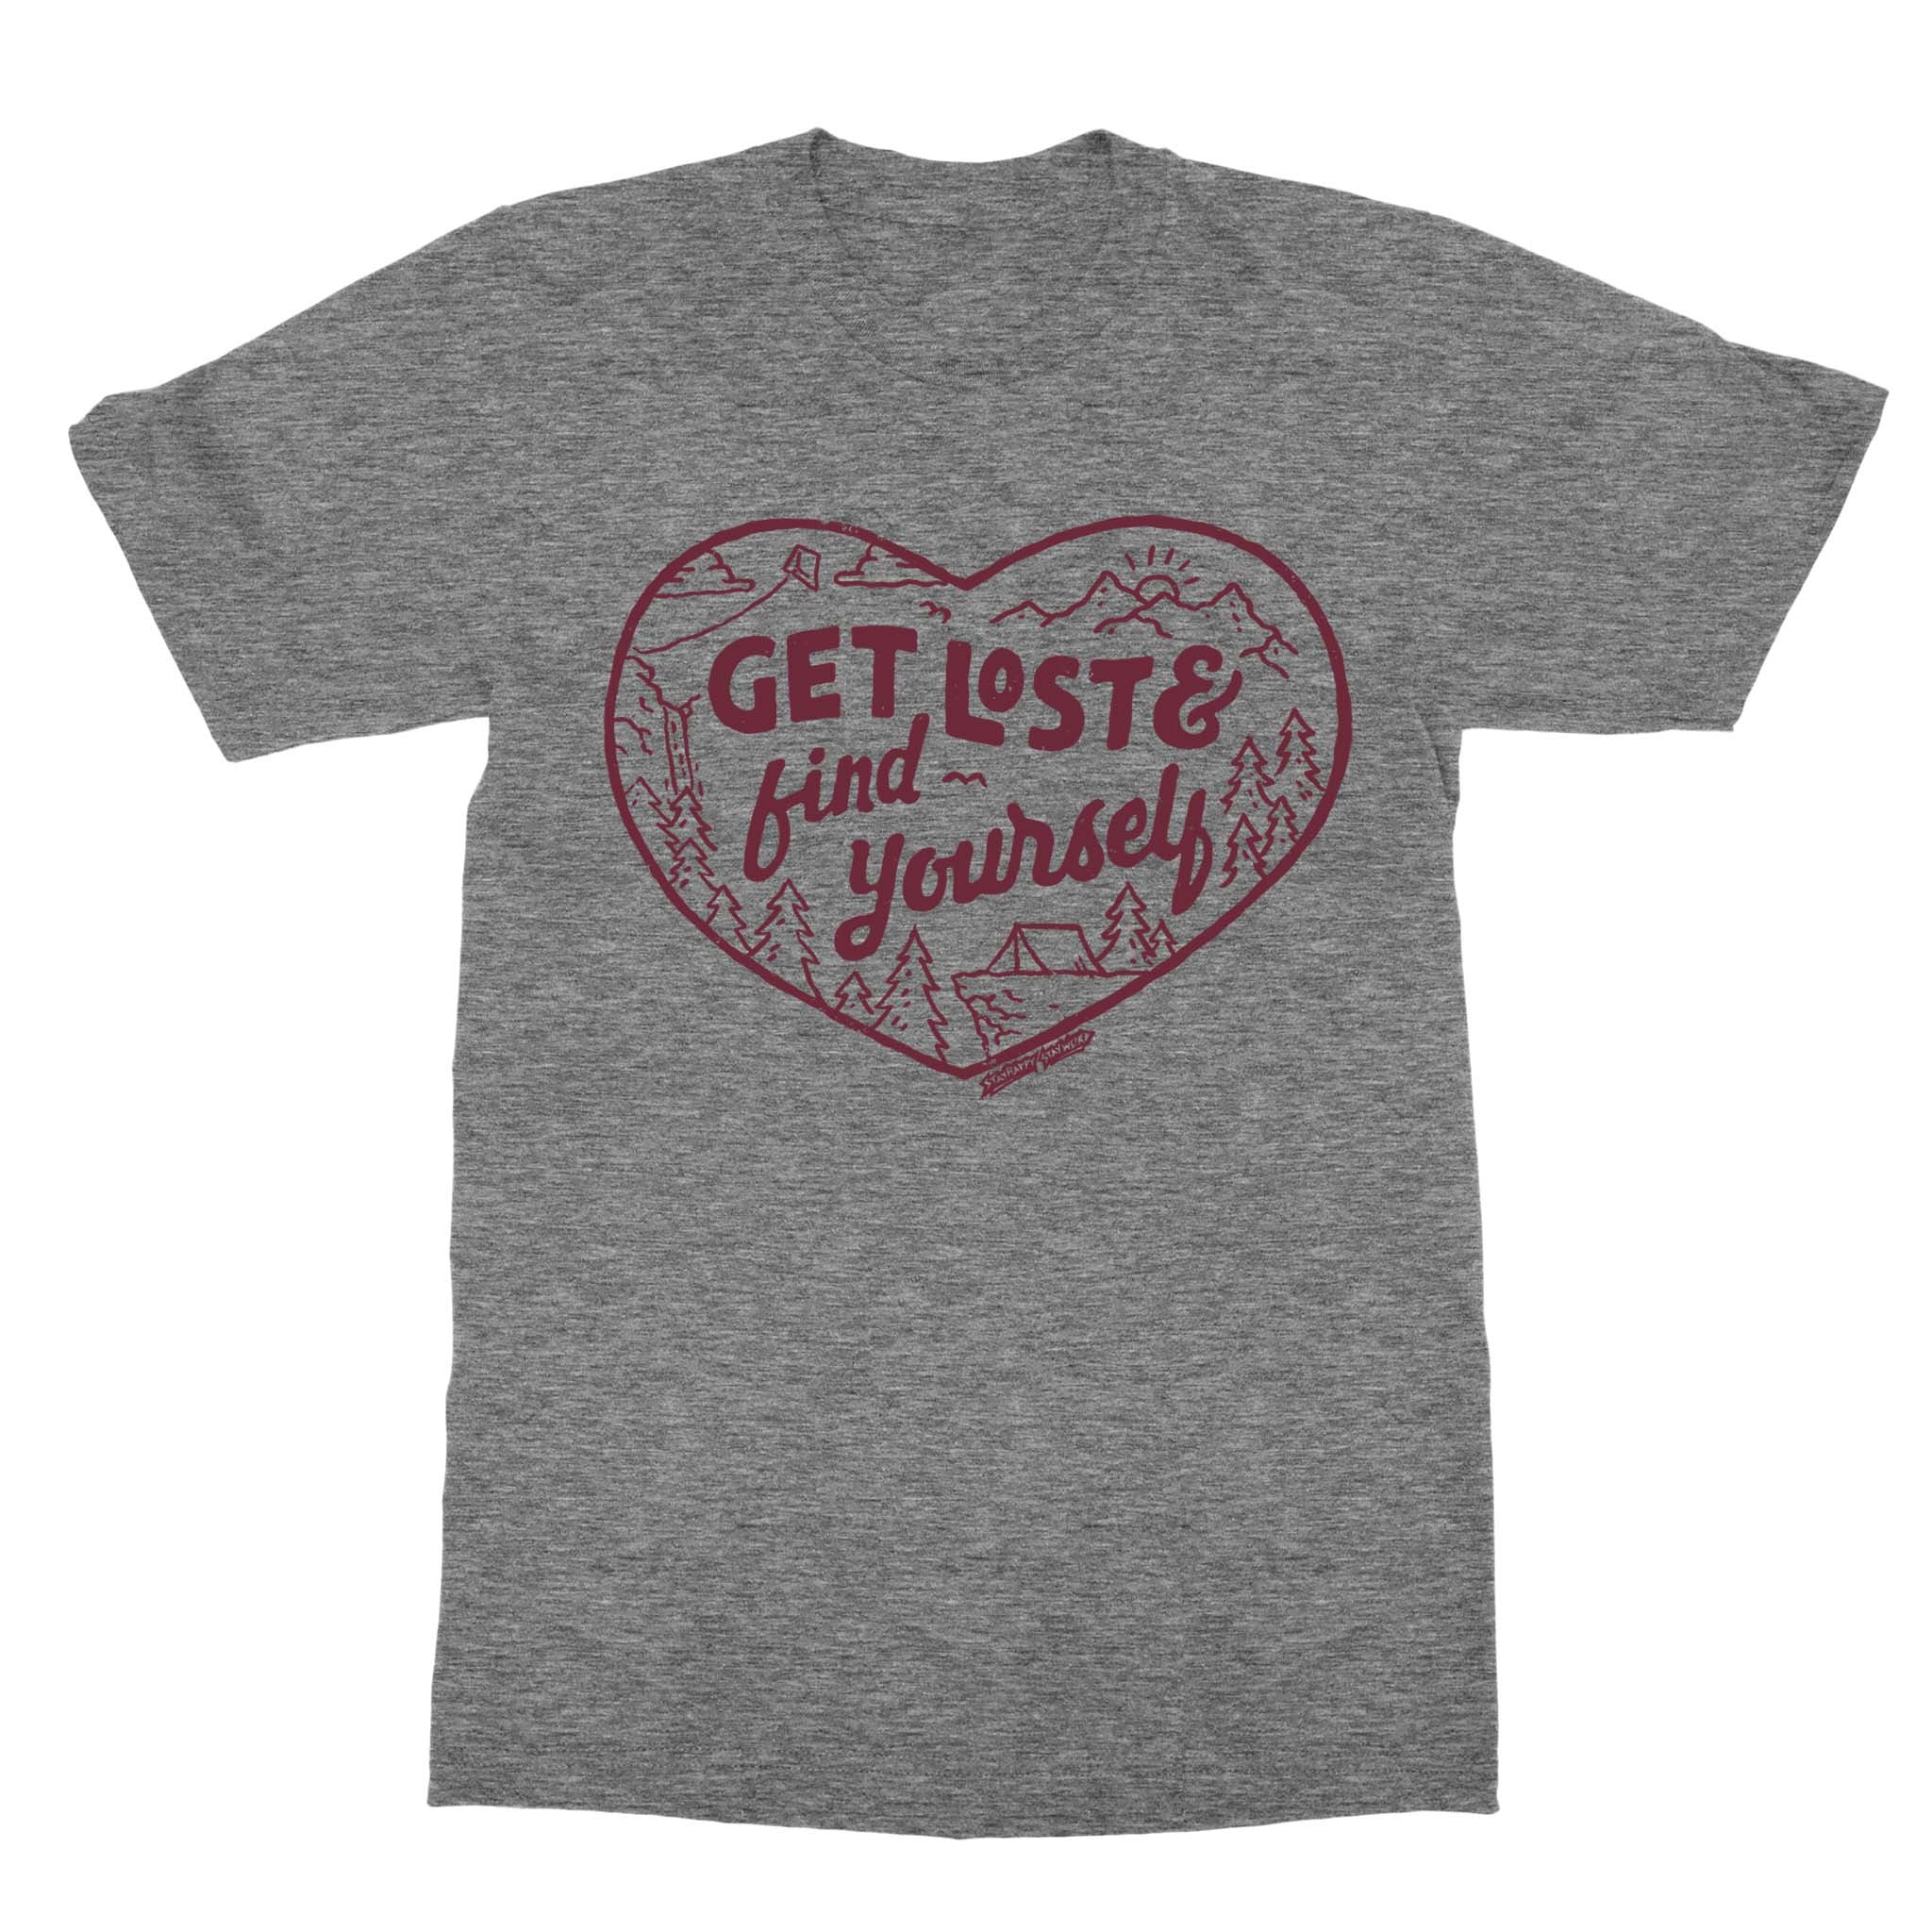 Get Lost & Find Yourself - Oxford Heather Shirt